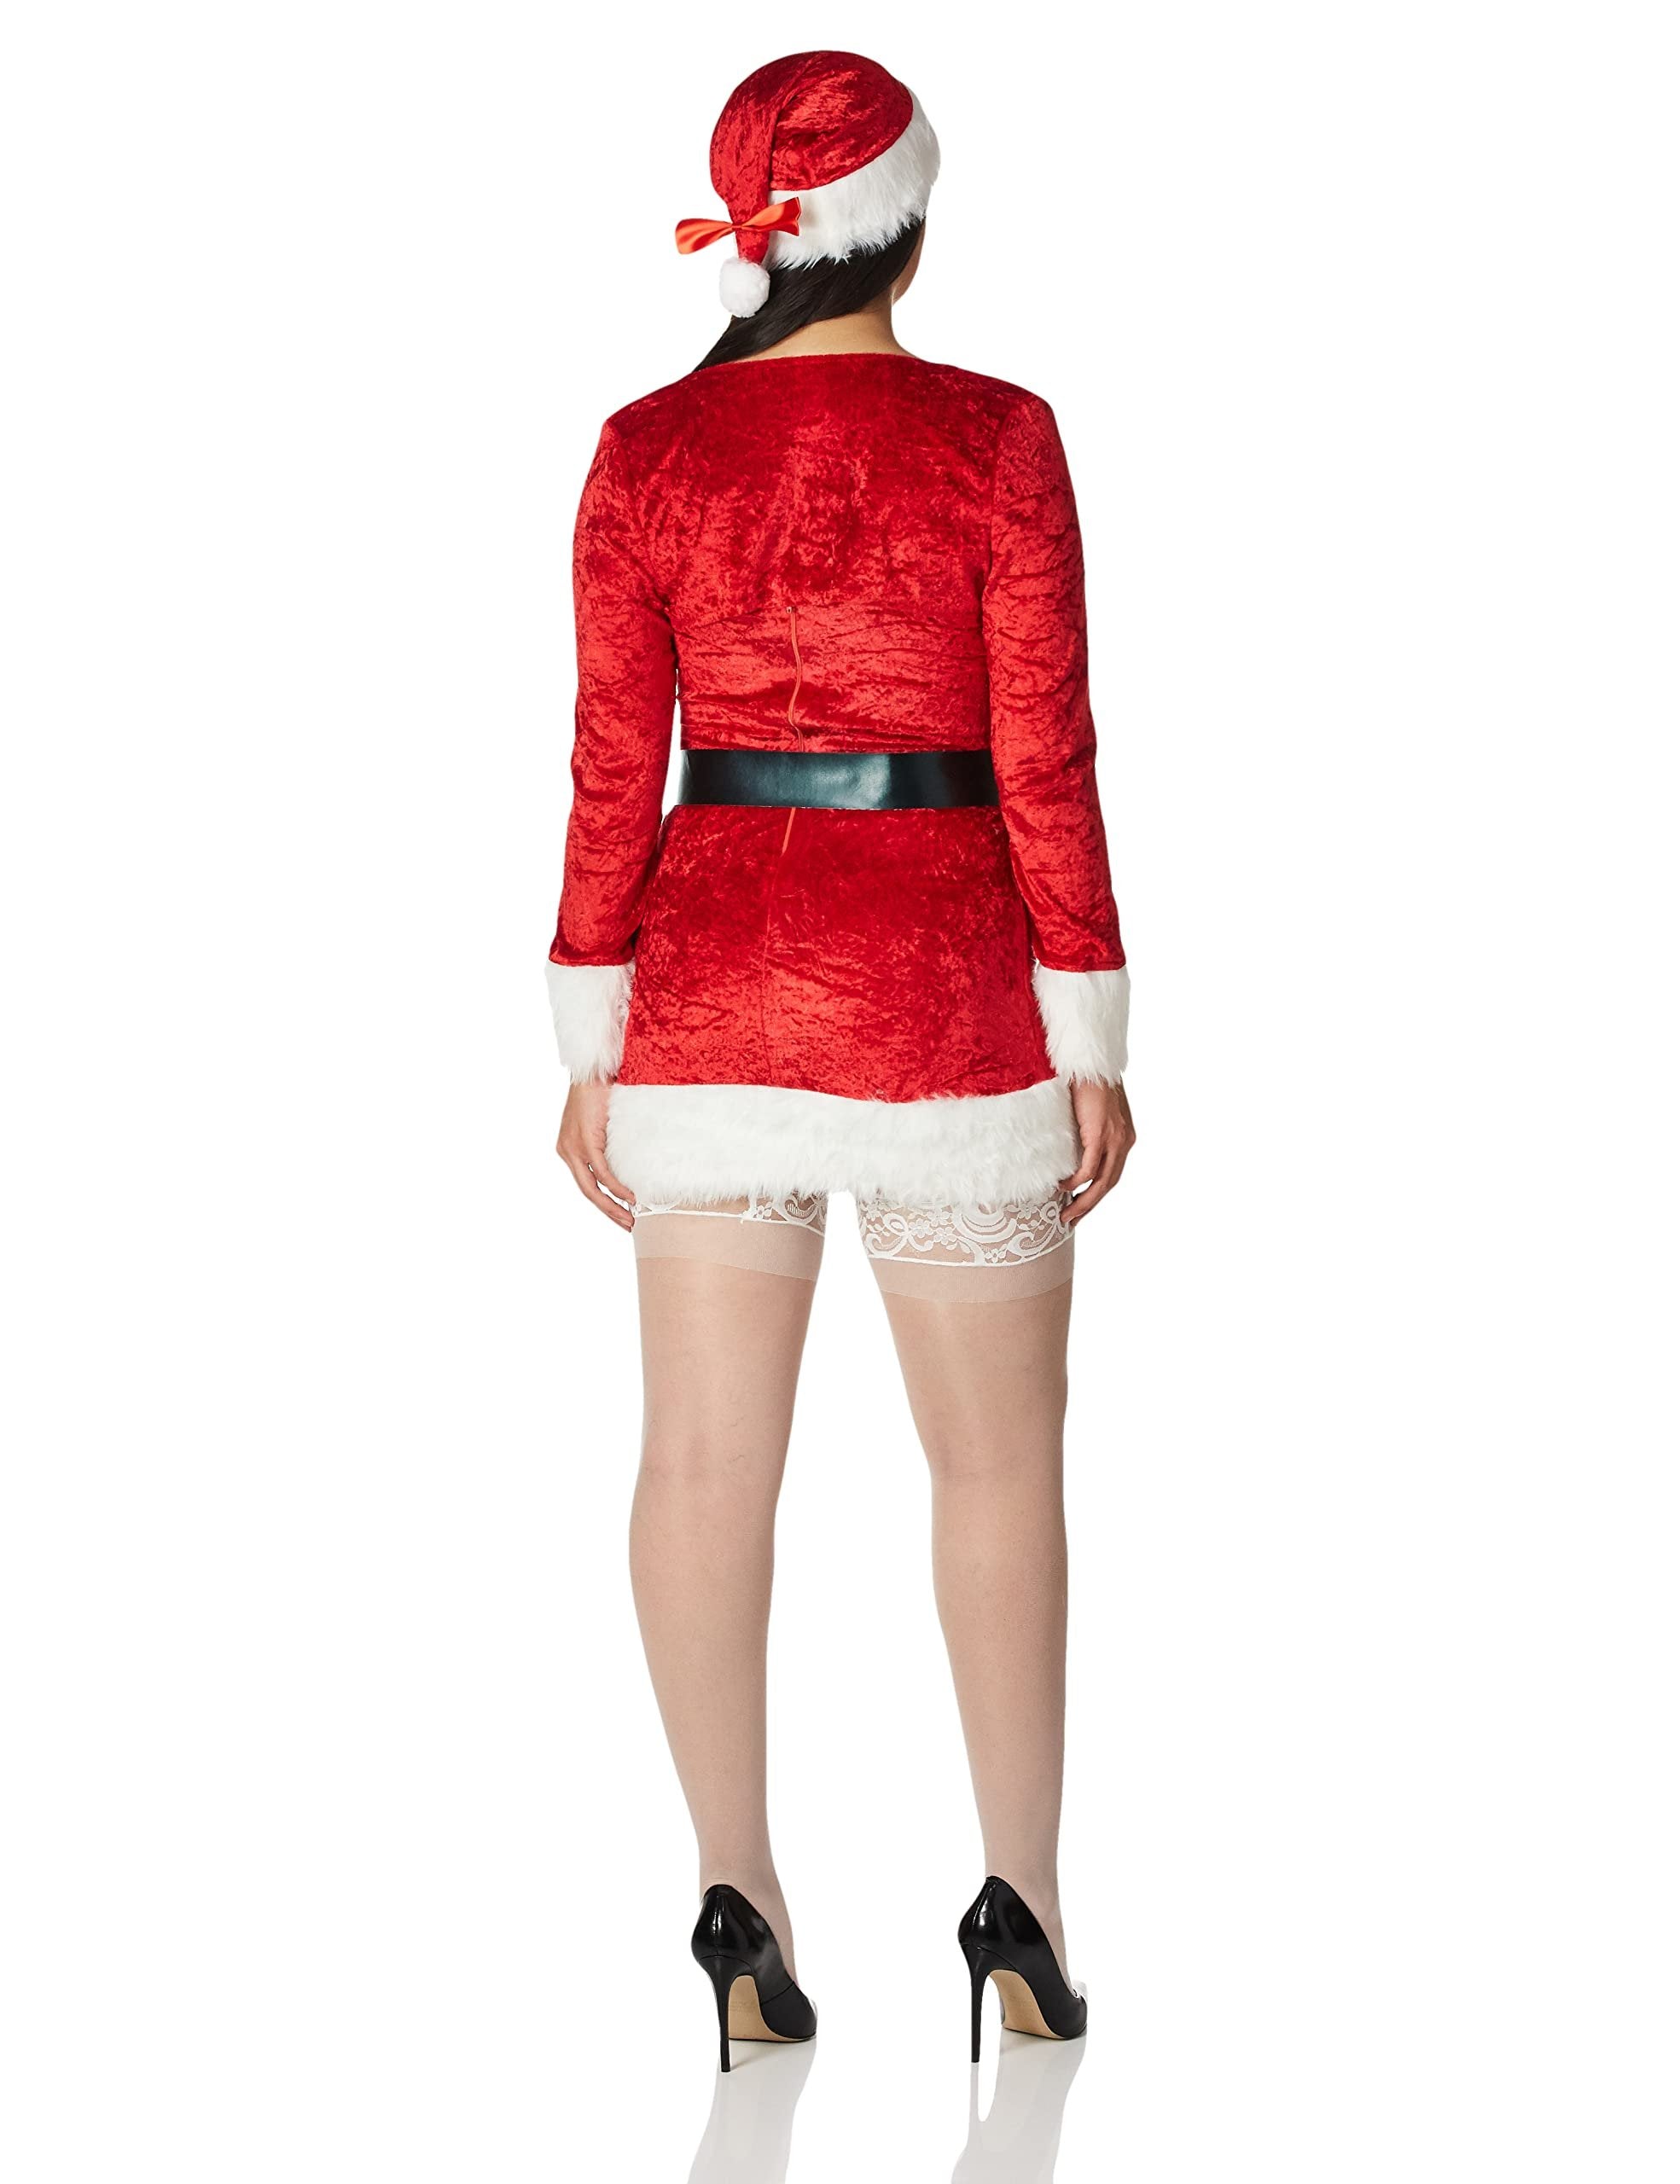 Dreamgirl Women's Santa Baby Costume, Red, Extra Large